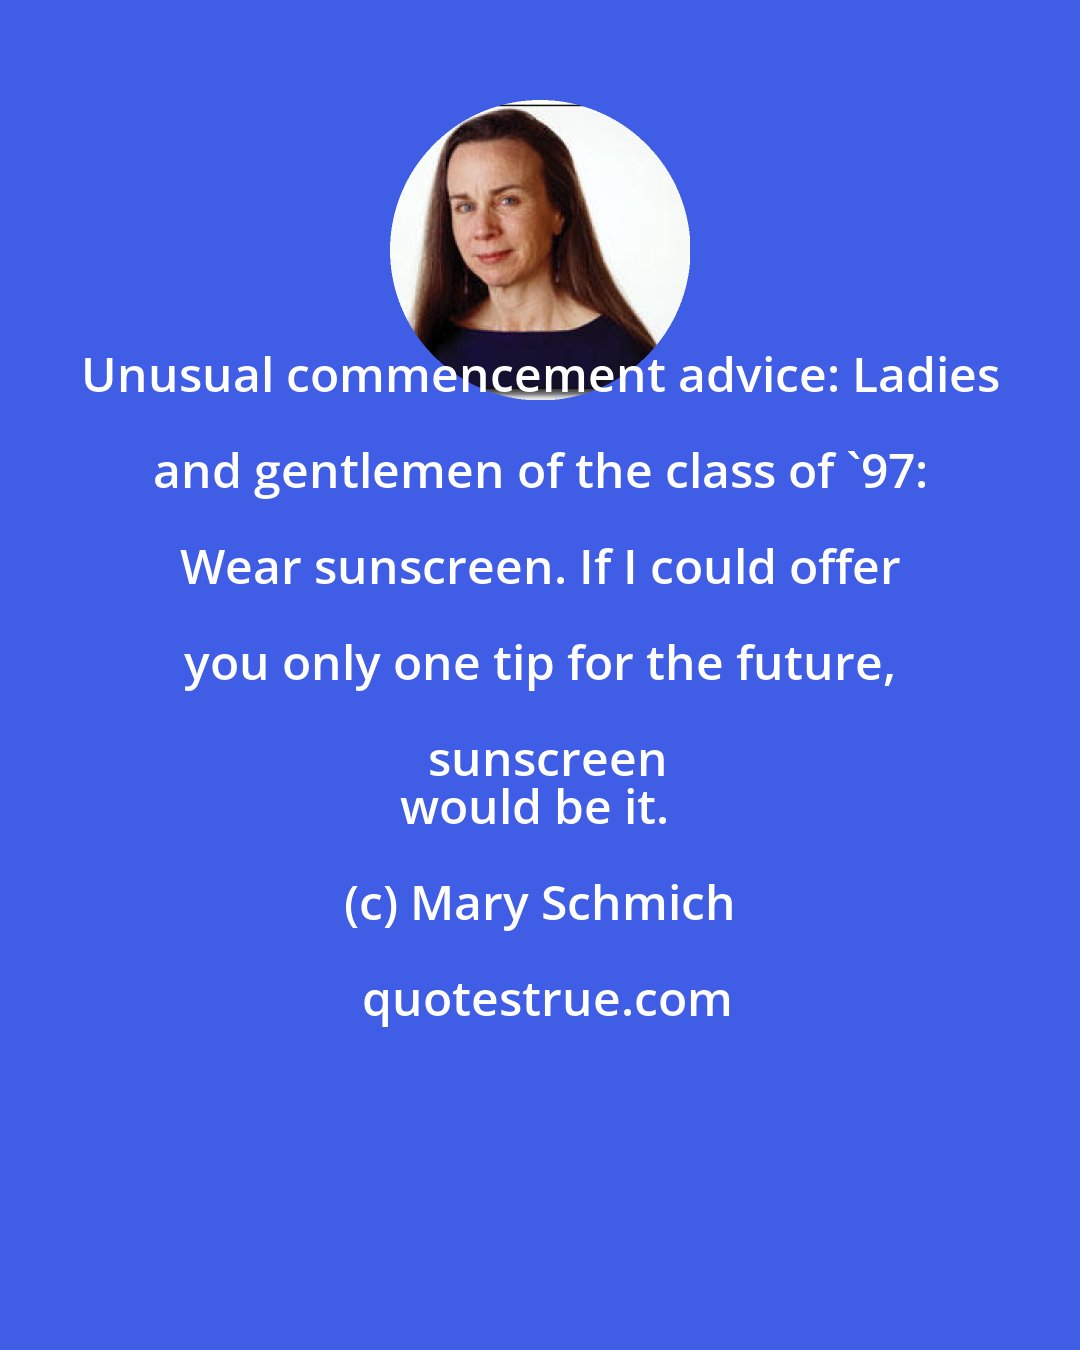 Mary Schmich: Unusual commencement advice: Ladies and gentlemen of the class of '97: Wear sunscreen. If I could offer you only one tip for the future, sunscreen
would be it.